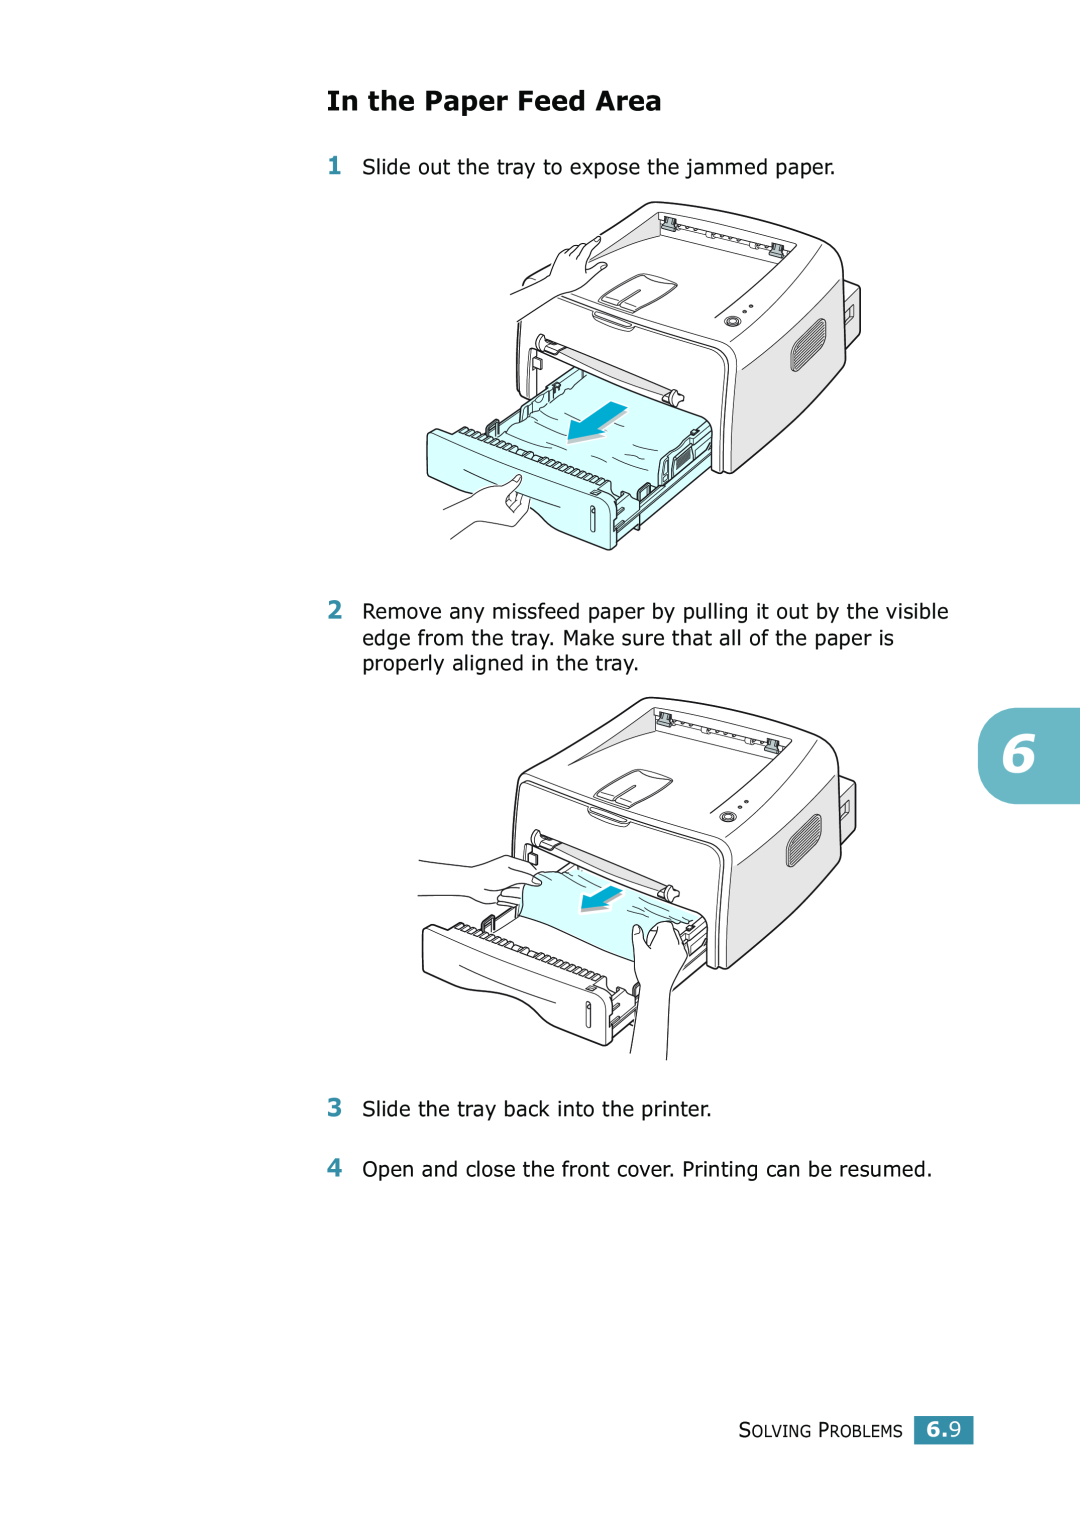 Samsung ML-1520 manual In the Paper Feed Area, Slide out the tray to expose the jammed paper, Solving Problems 